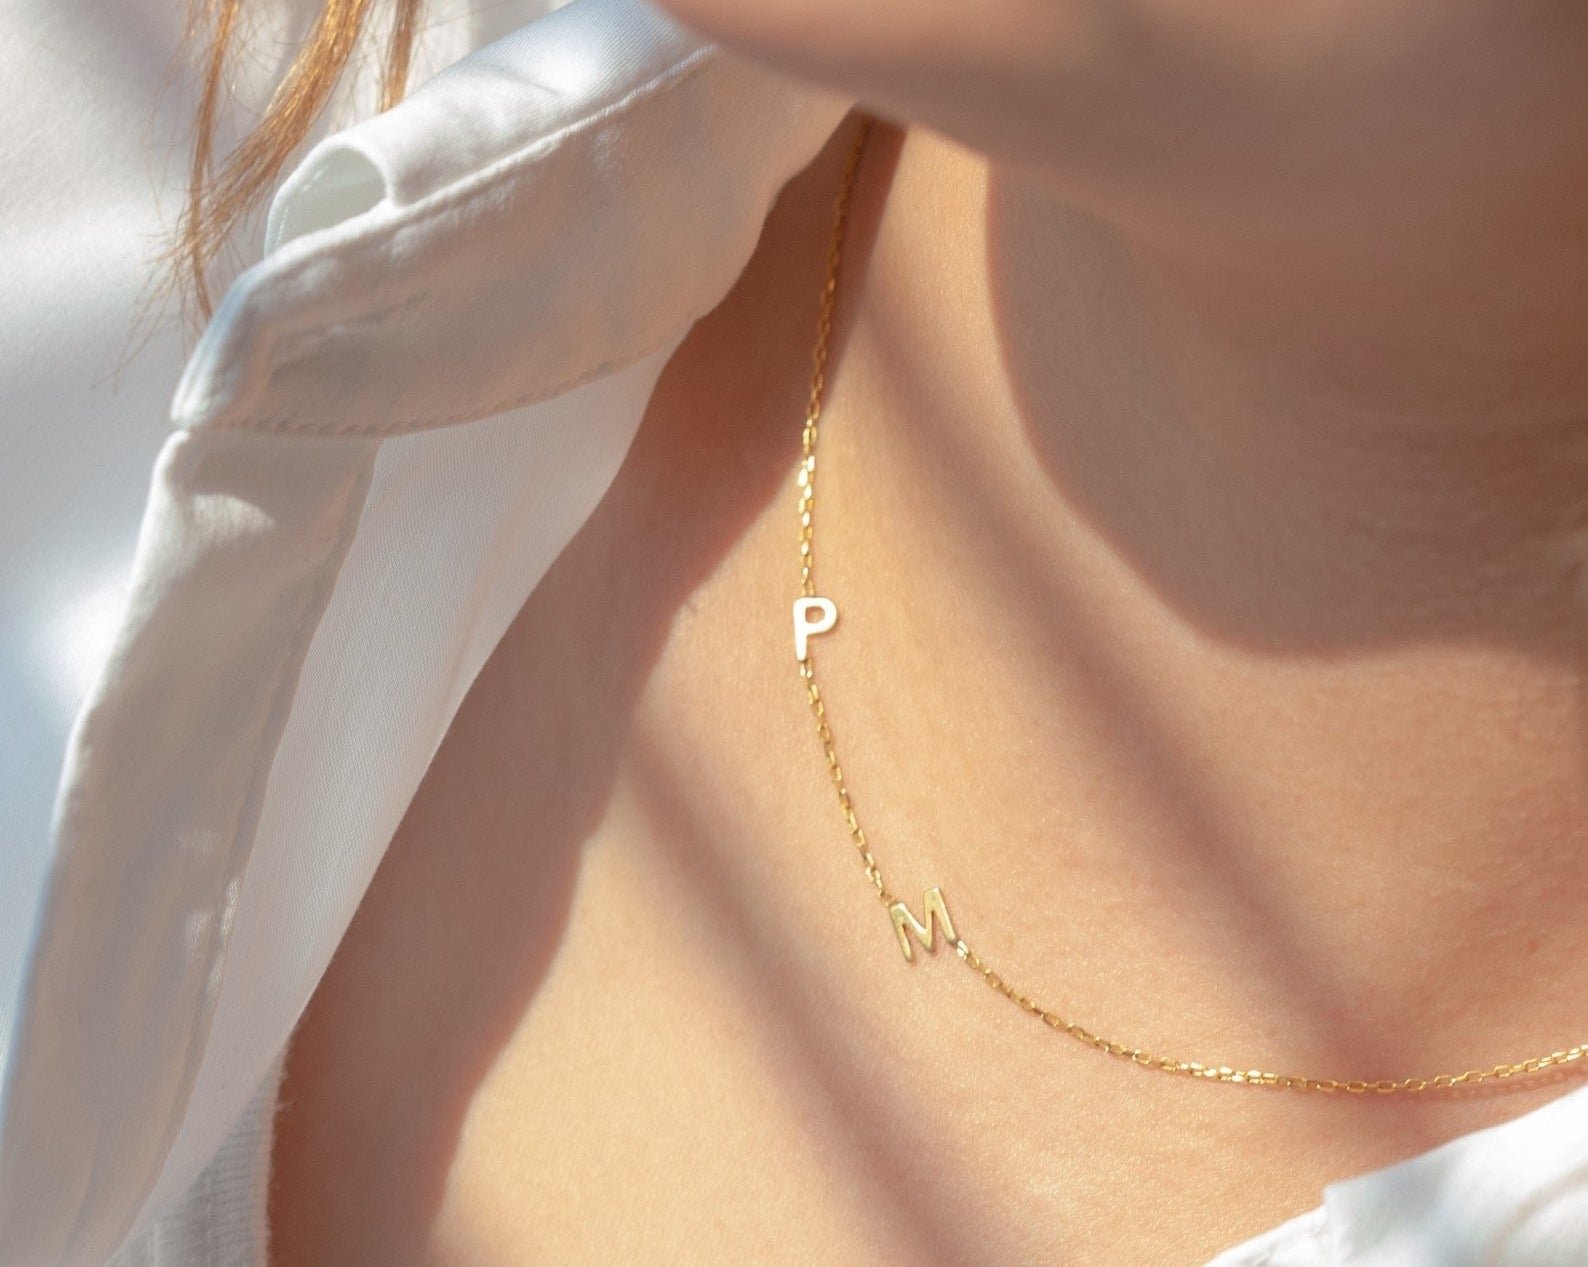 A model wears the gold necklace with the initials P and M attached to it.